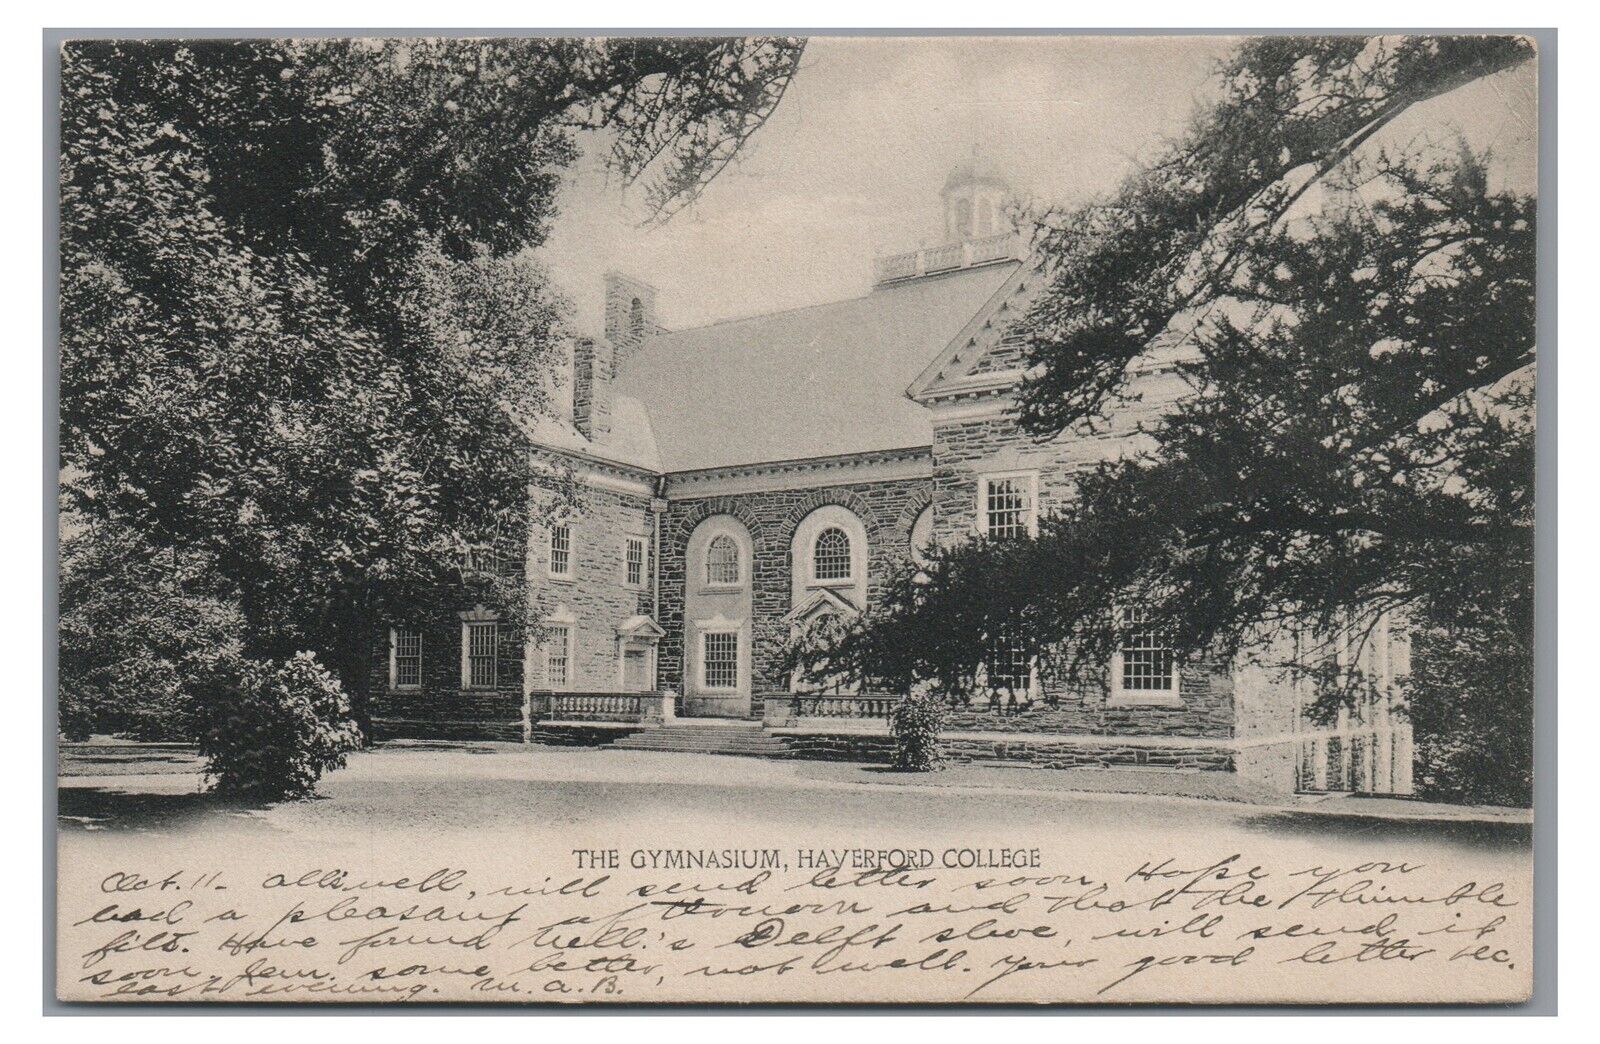 Gymnasium at HAVERFORD COLLEGE PA Delaware County 1905 Postcard